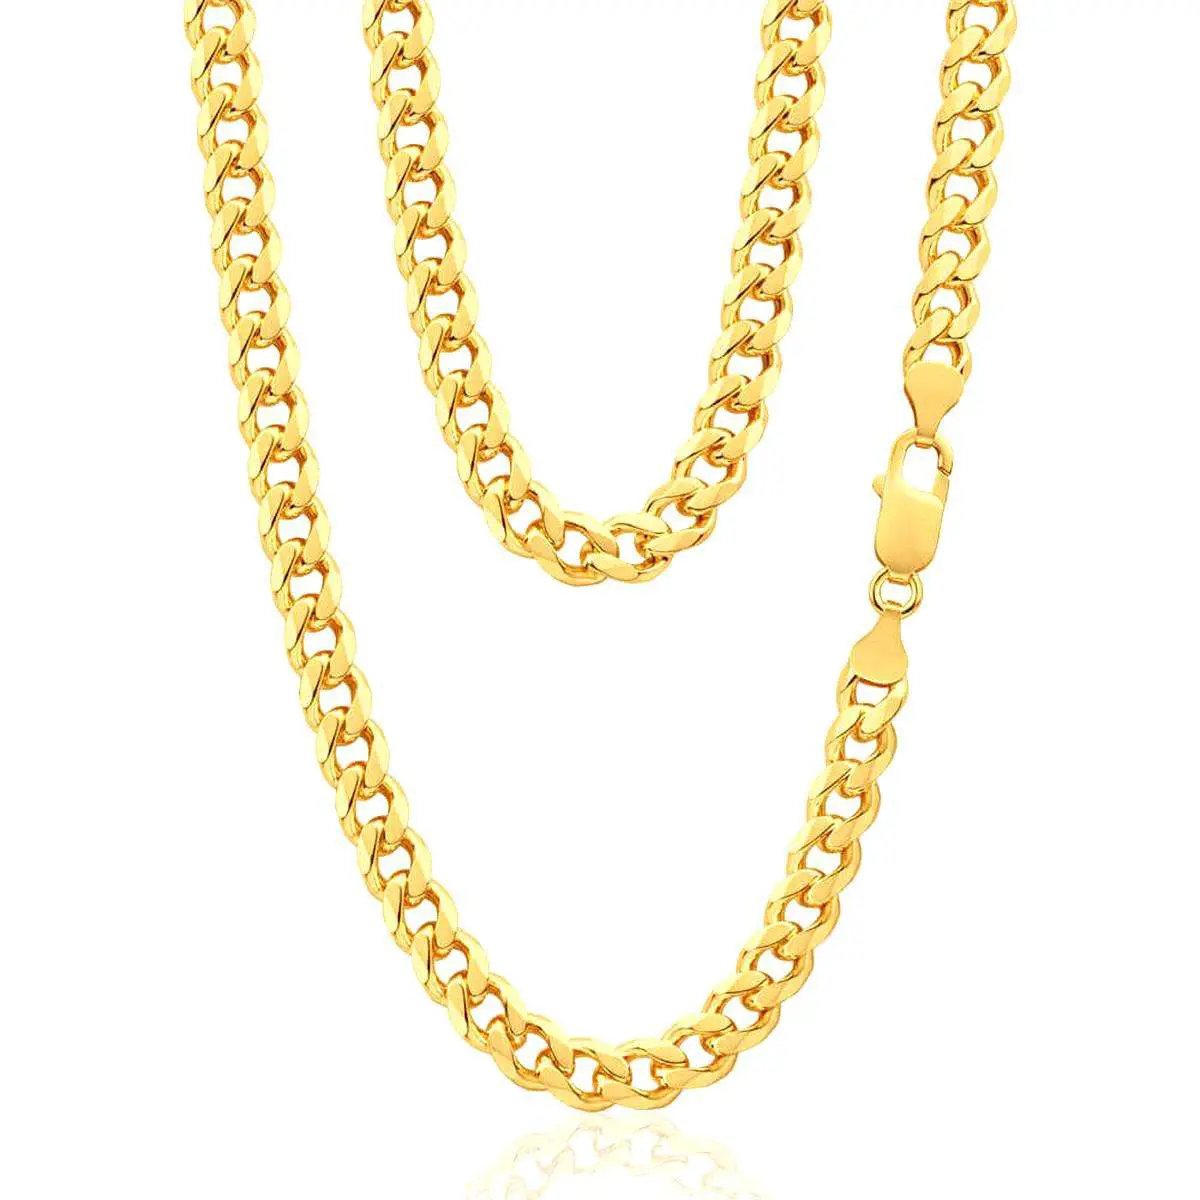 Mens 9Ct Gold Chain for sale in UK